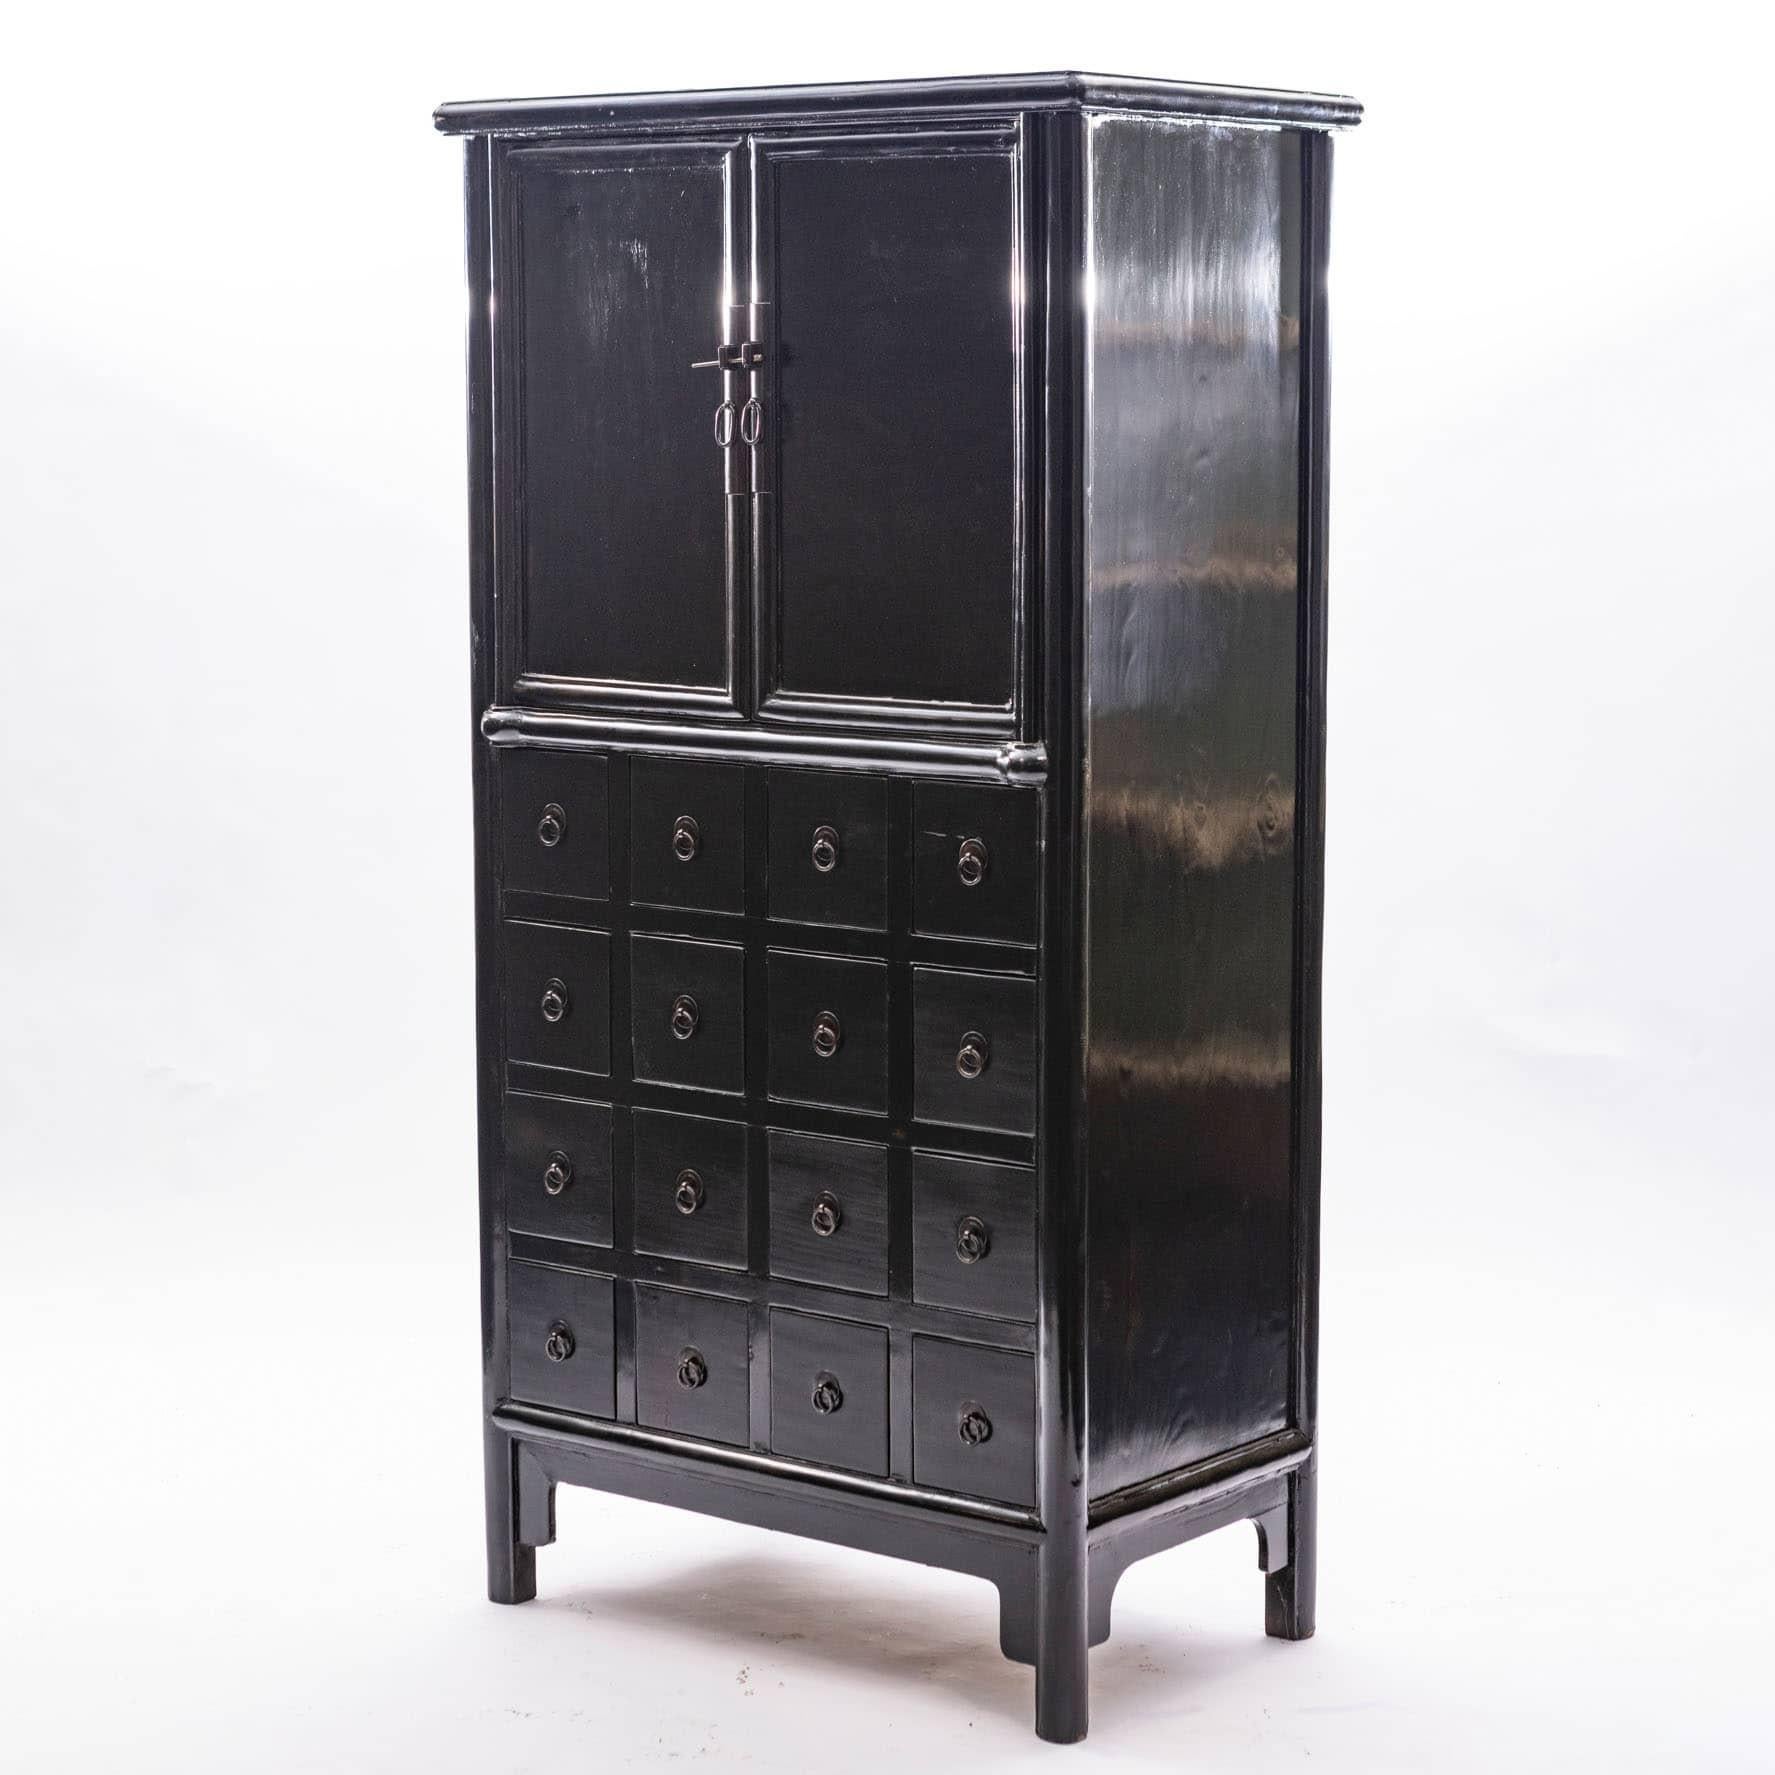 Qing Antique Chinese Pharmacy Cabinet, Black Lacquer, c 1860-1880